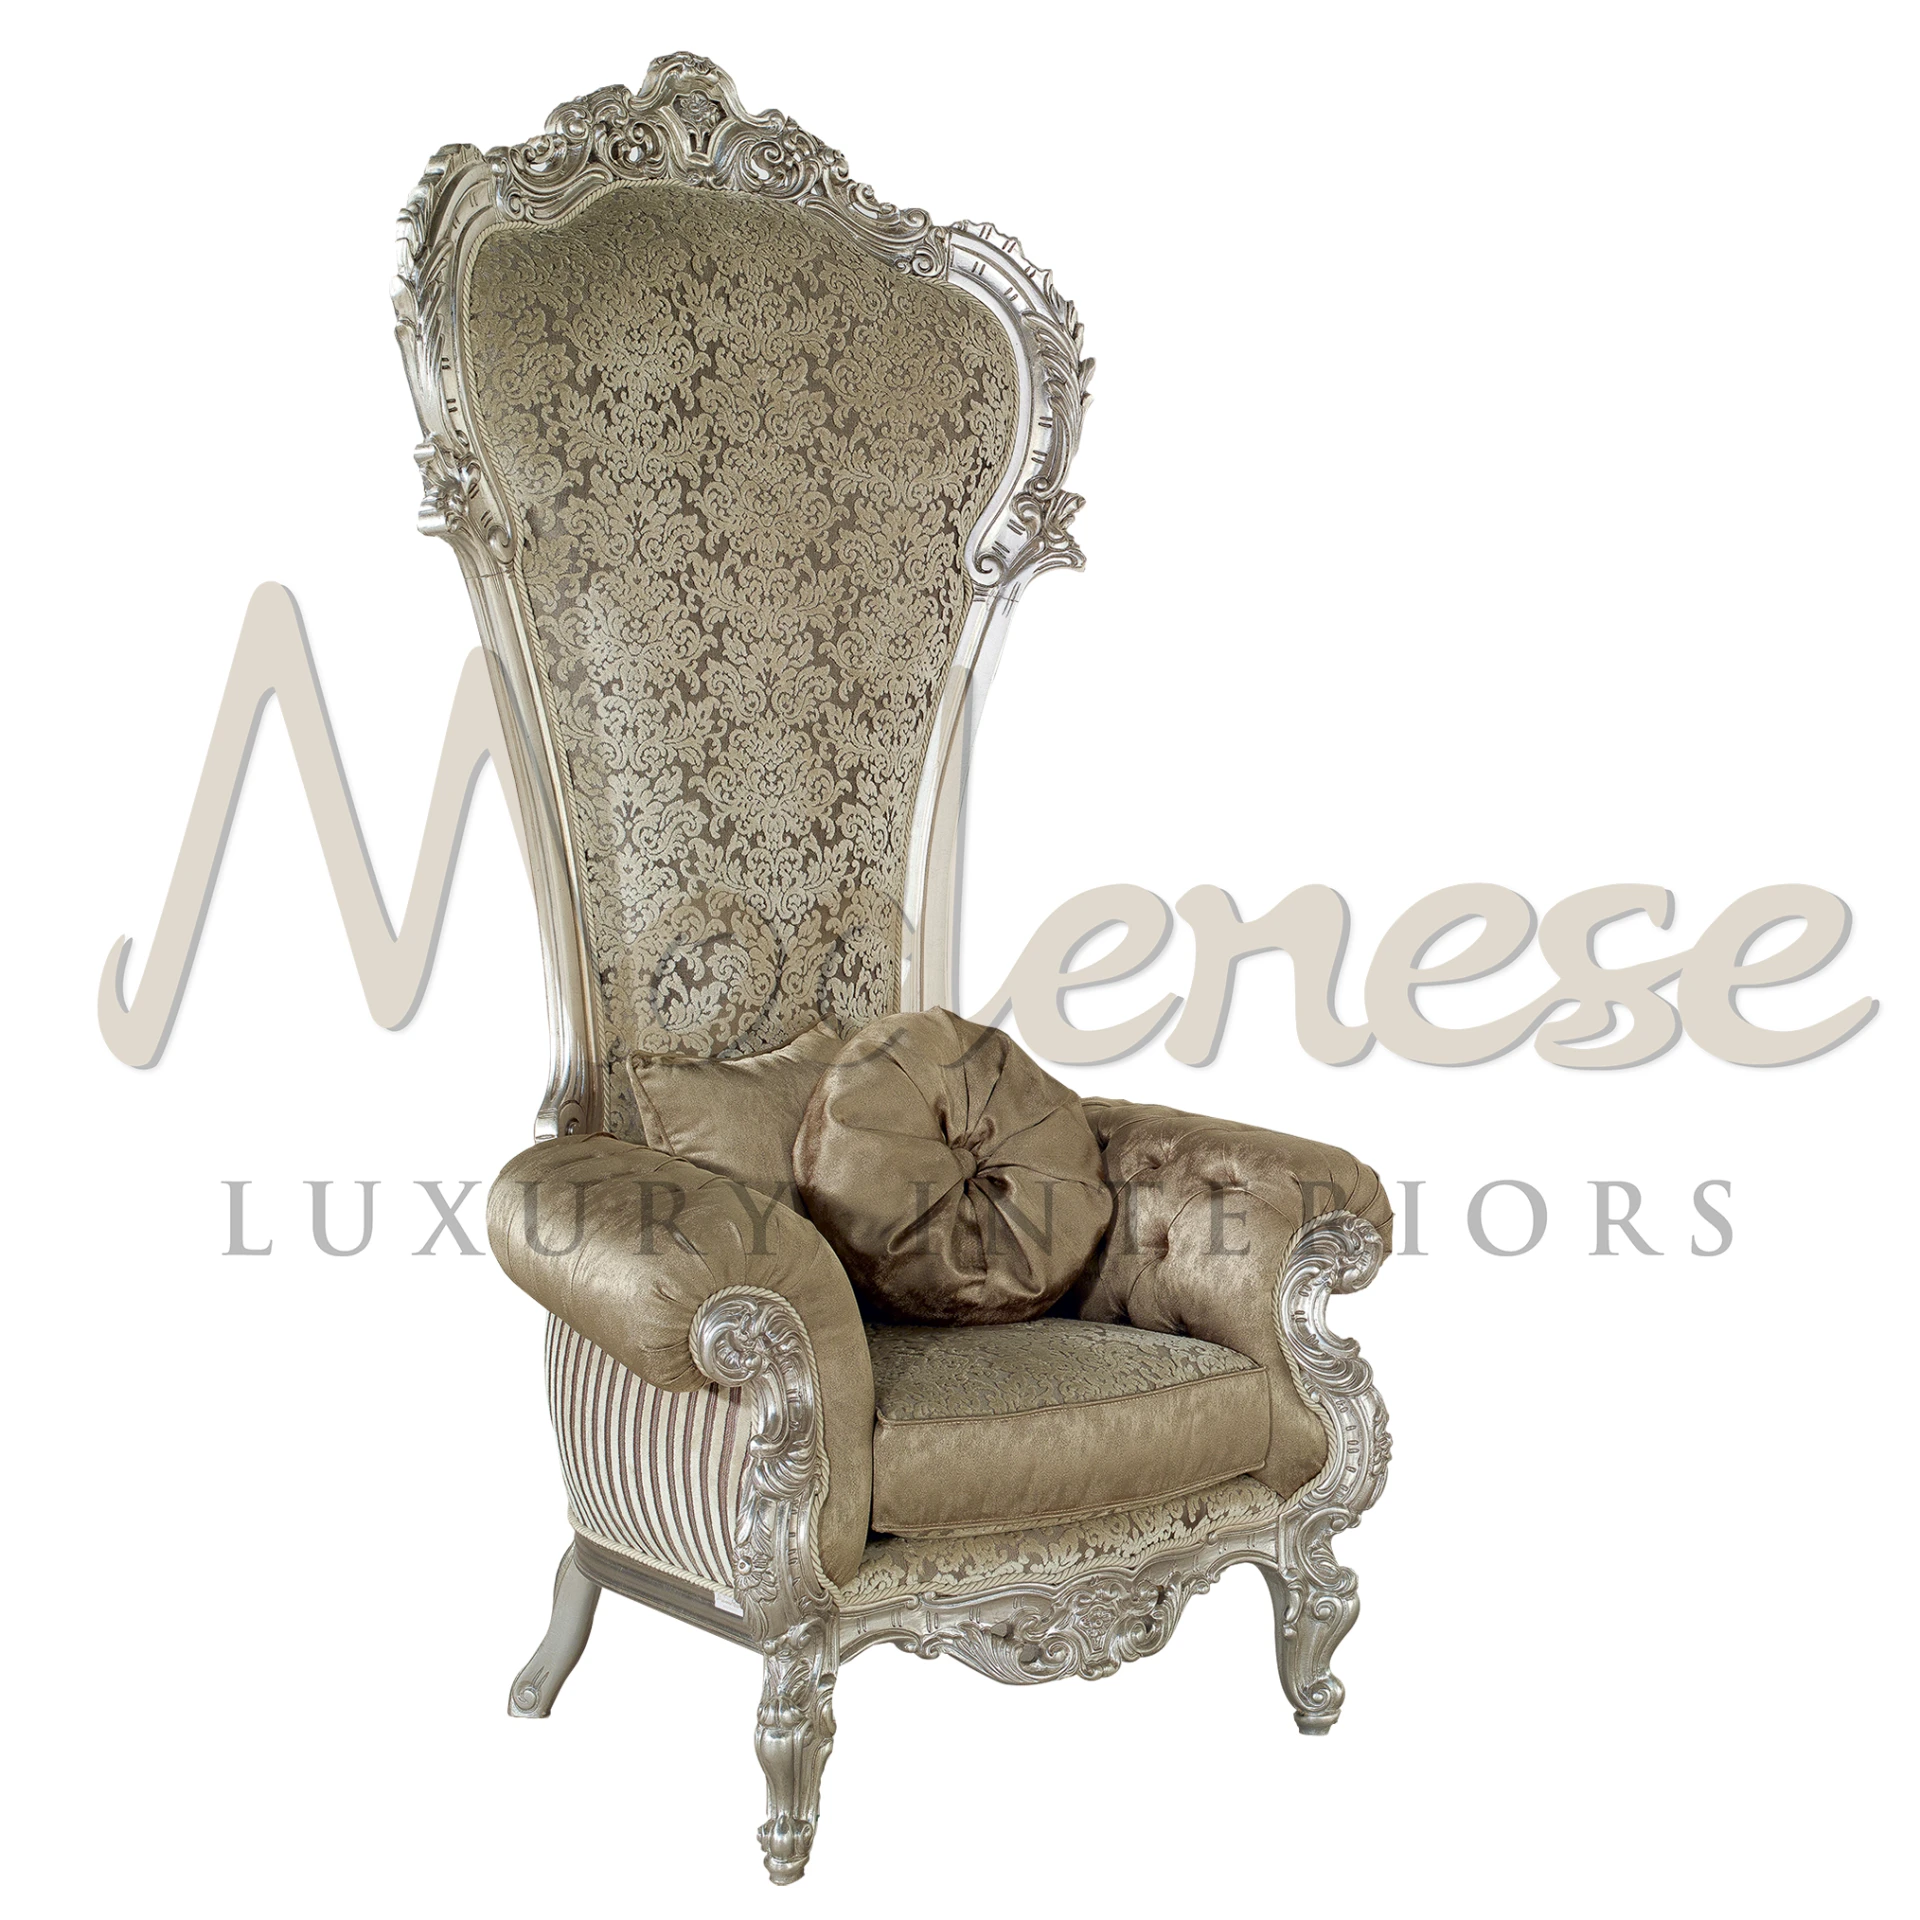 Regal Elegant Throne Armchair with luxurious velvet upholstery and grand ornate design, perfect for a royal interior ambiance.
